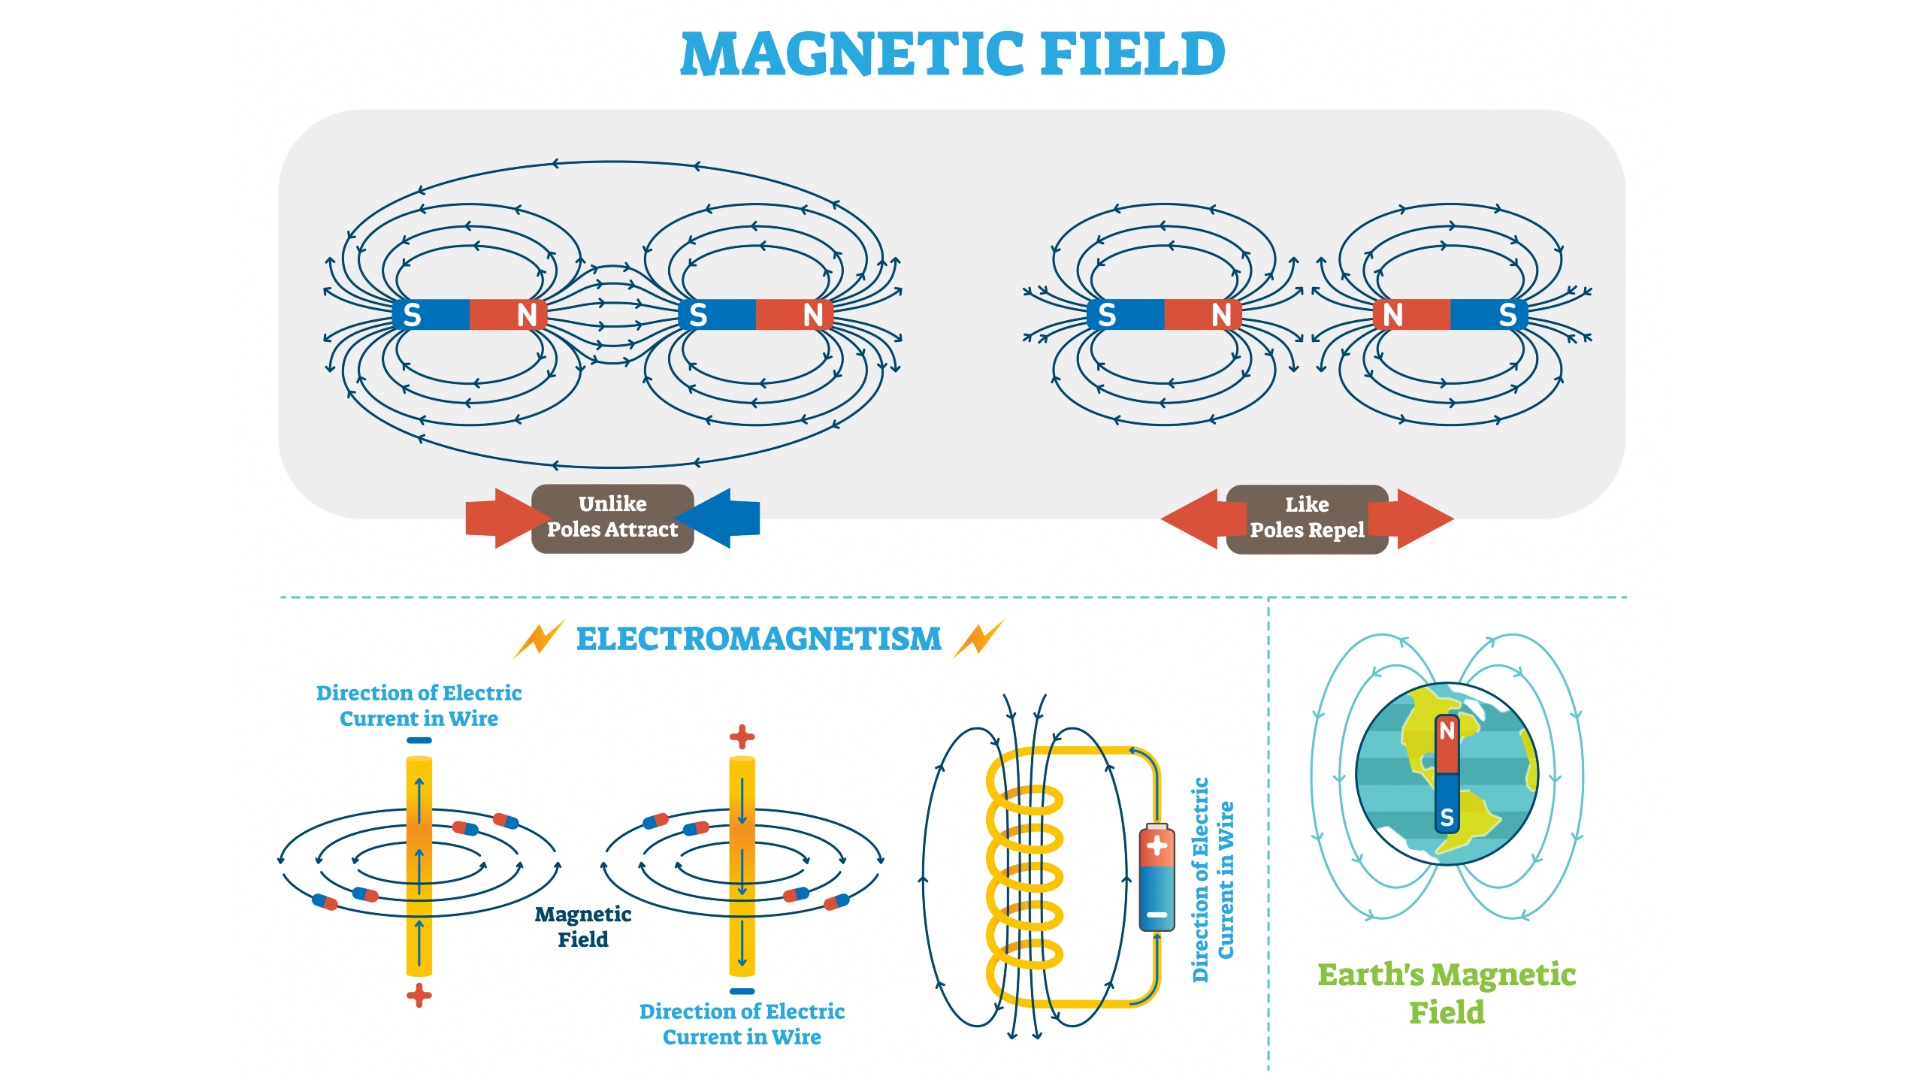 Three different diagrams showing: magnetic field (unlike poles attract and like poles repel), electromagnetism showing the direction of electric current in a wire, and Earth's magnetic field.